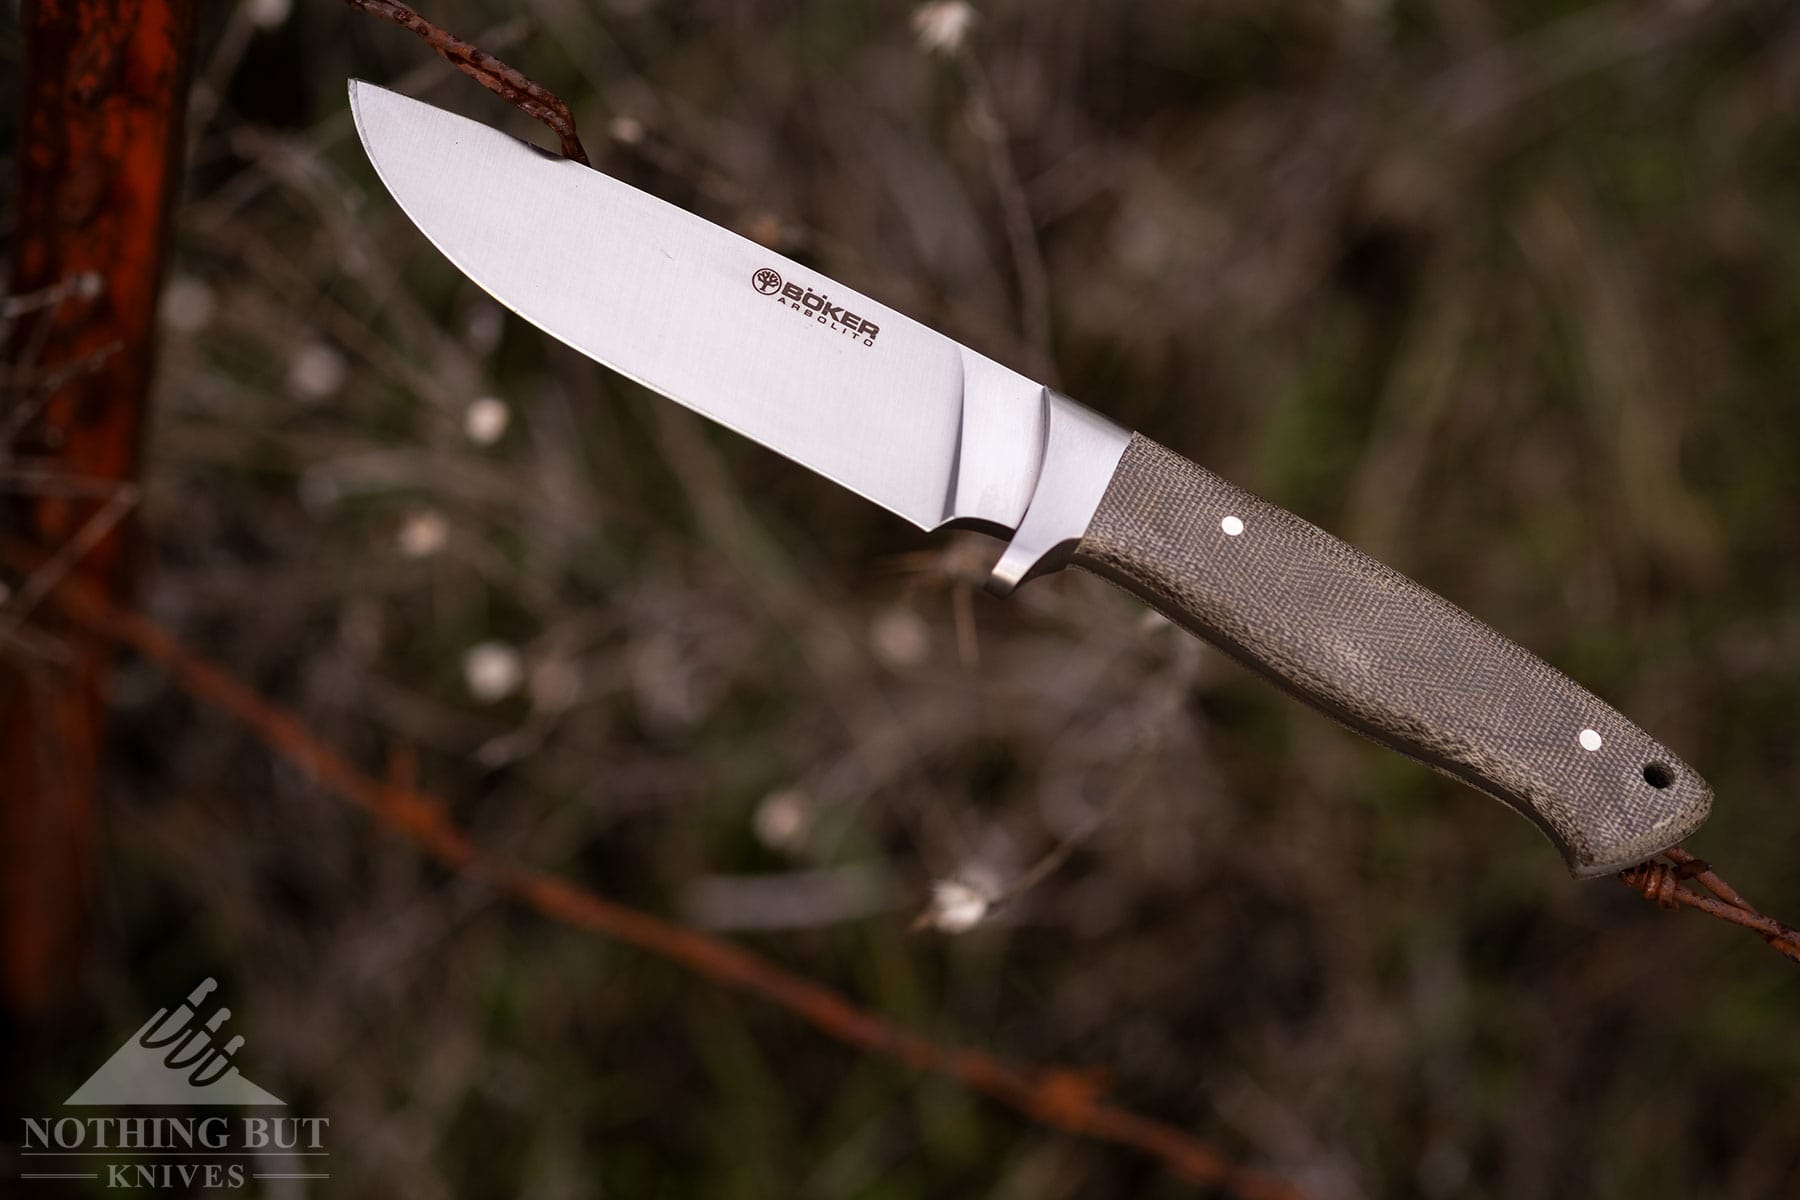 The Boker Arbolito Hunter fixed blade knife made in Argentina shown here balanced on a barbed wire fence.